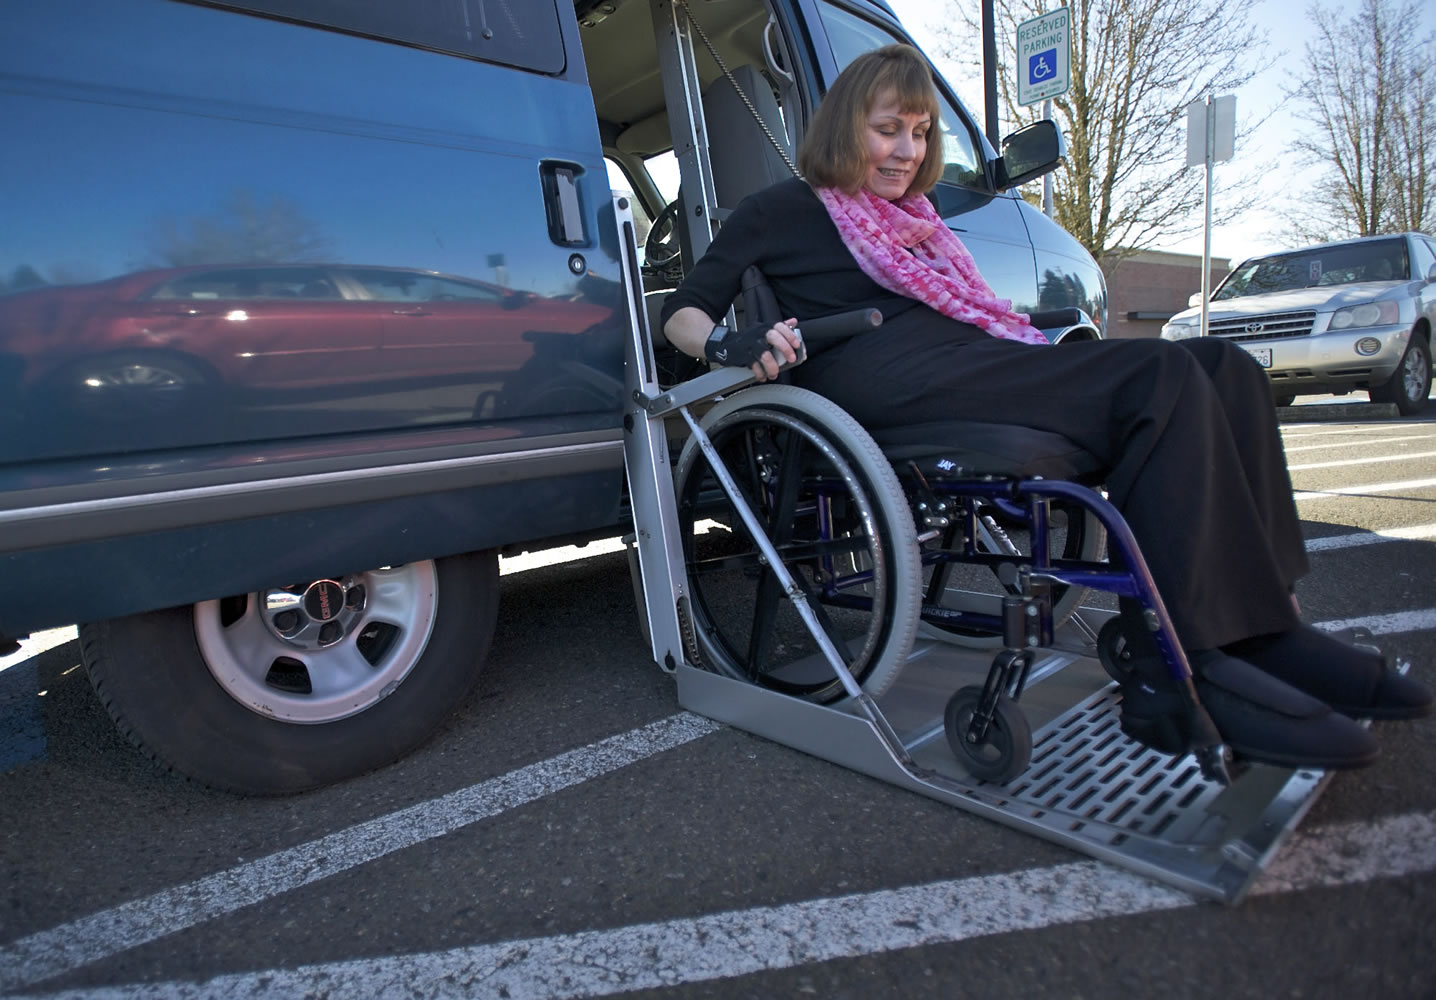 Connie Brittain, 56, of Vancouver, does business at places she knows have adequate disabled parking, such as the Safeway on Northeast 112th Avenue.